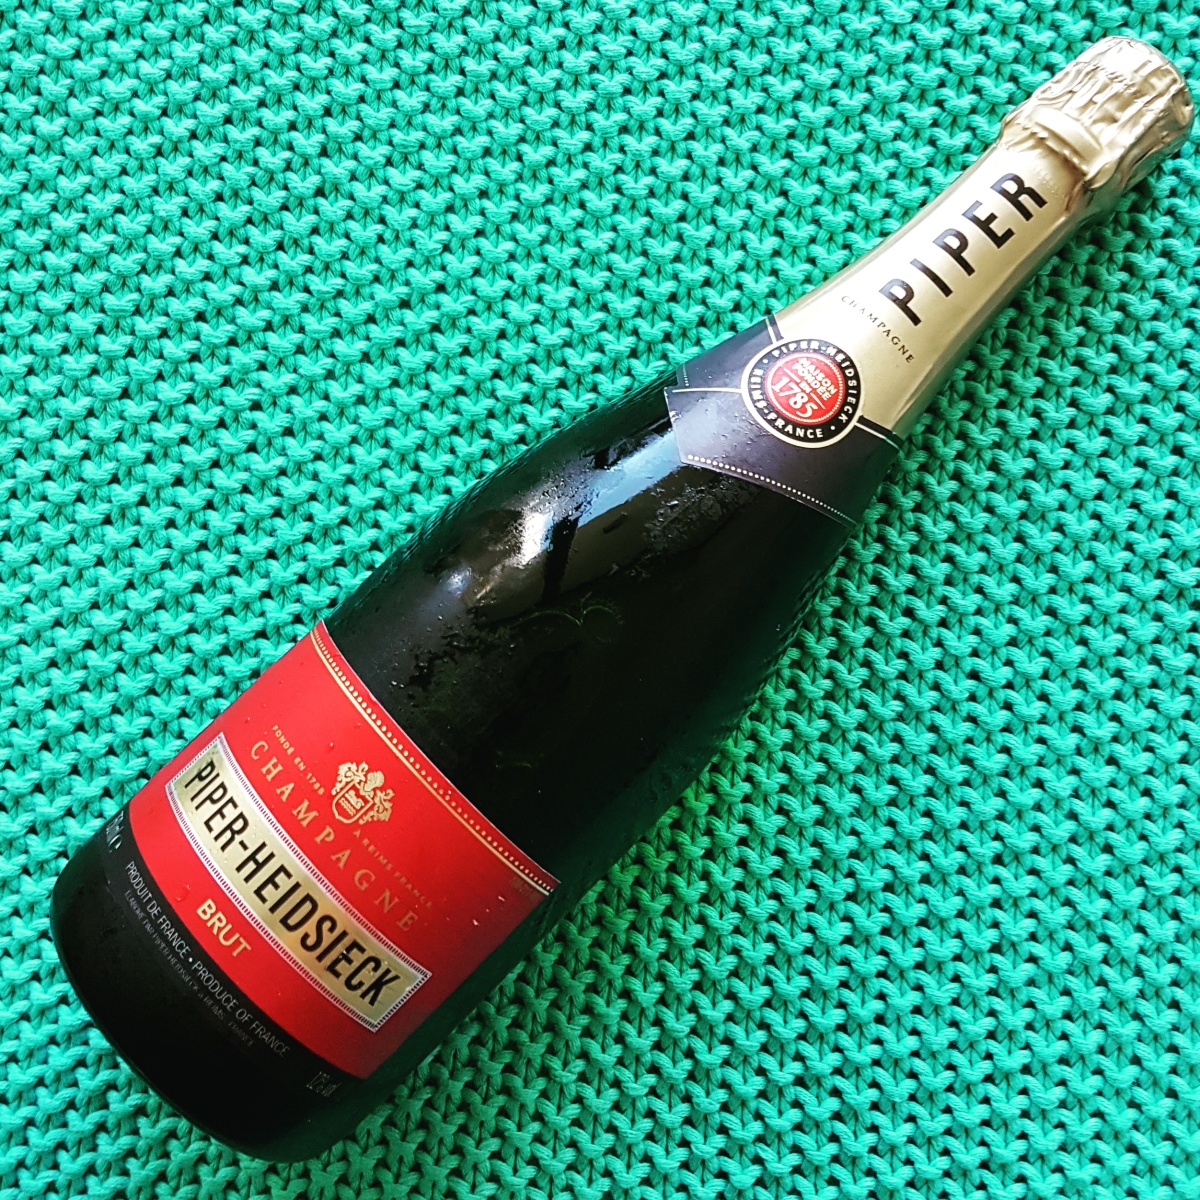 Cuvee Piper Brut – Heidsieck Review: Tips NV Champagne